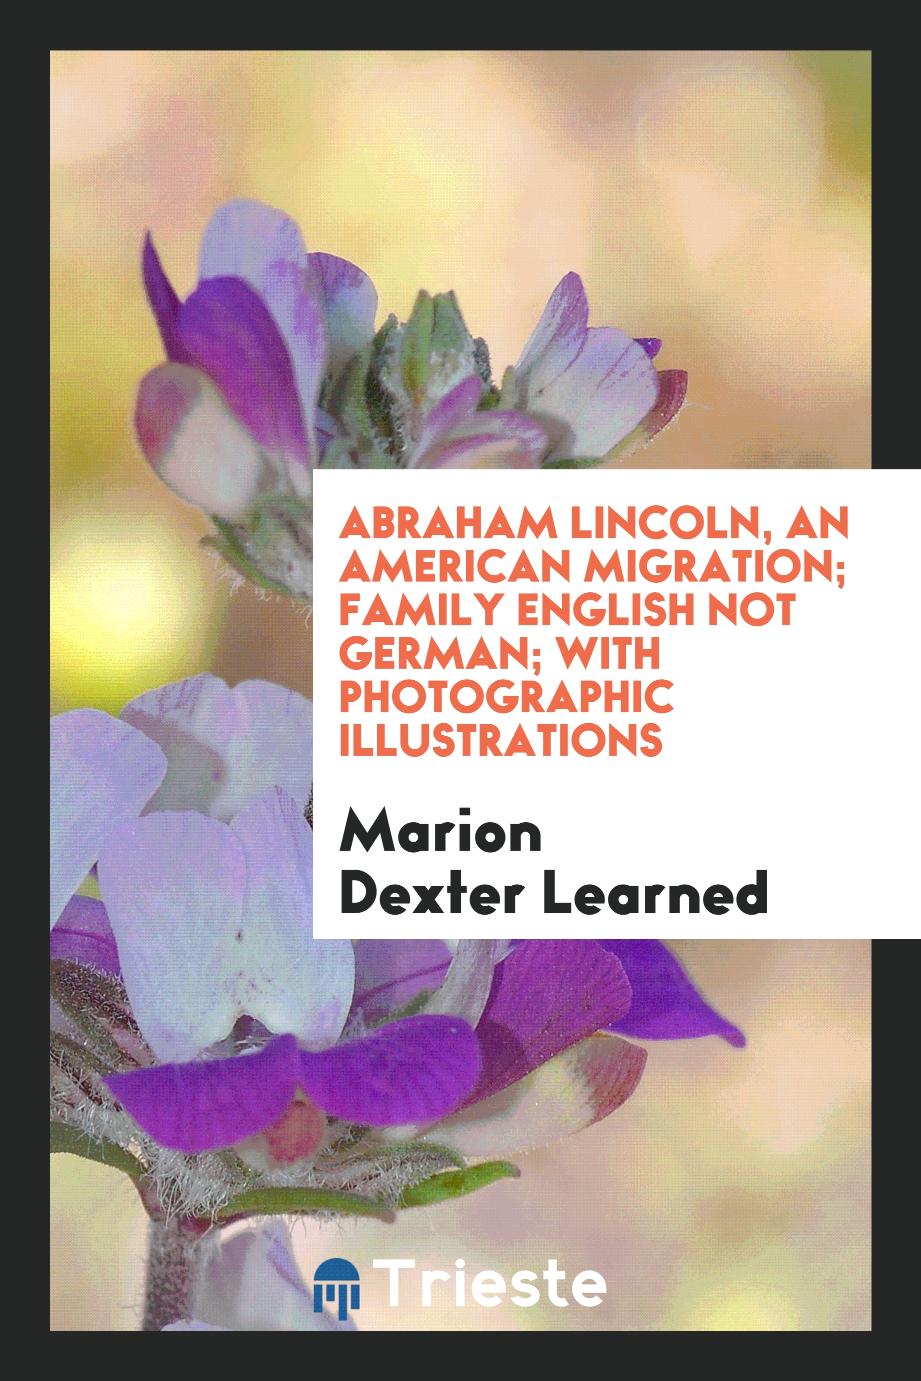 Abraham Lincoln, an American migration; family English not German; with photographic illustrations